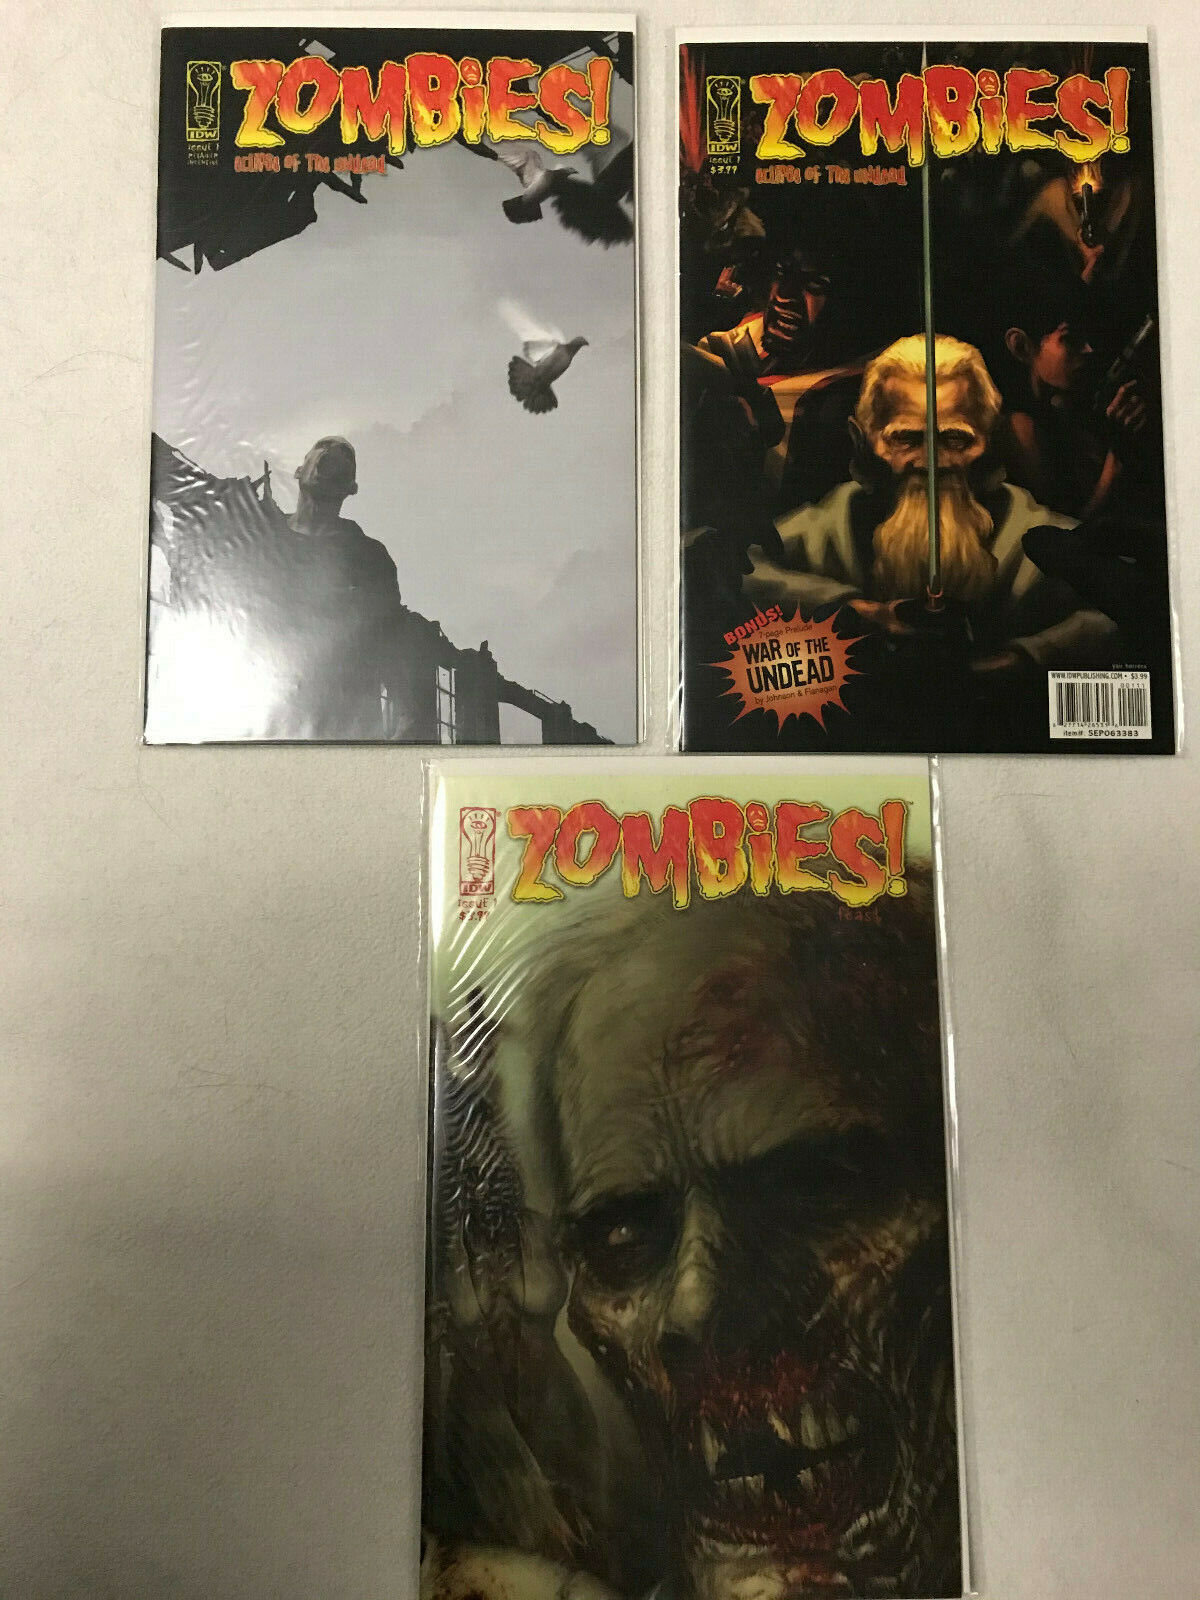 Zombies (IDW) Feast #1 & Eclipse of the Undead #1 Regular & Retailer Incentive